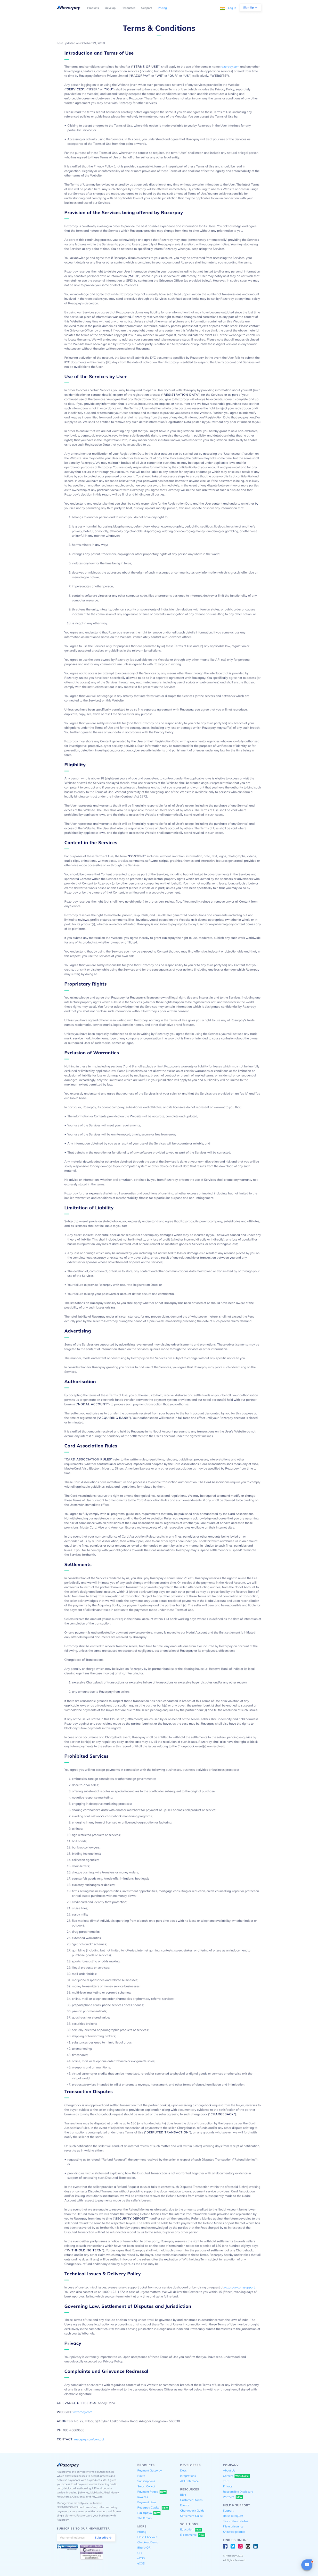 Screenshot of the Terms and Conditions page from the Razorpay website.